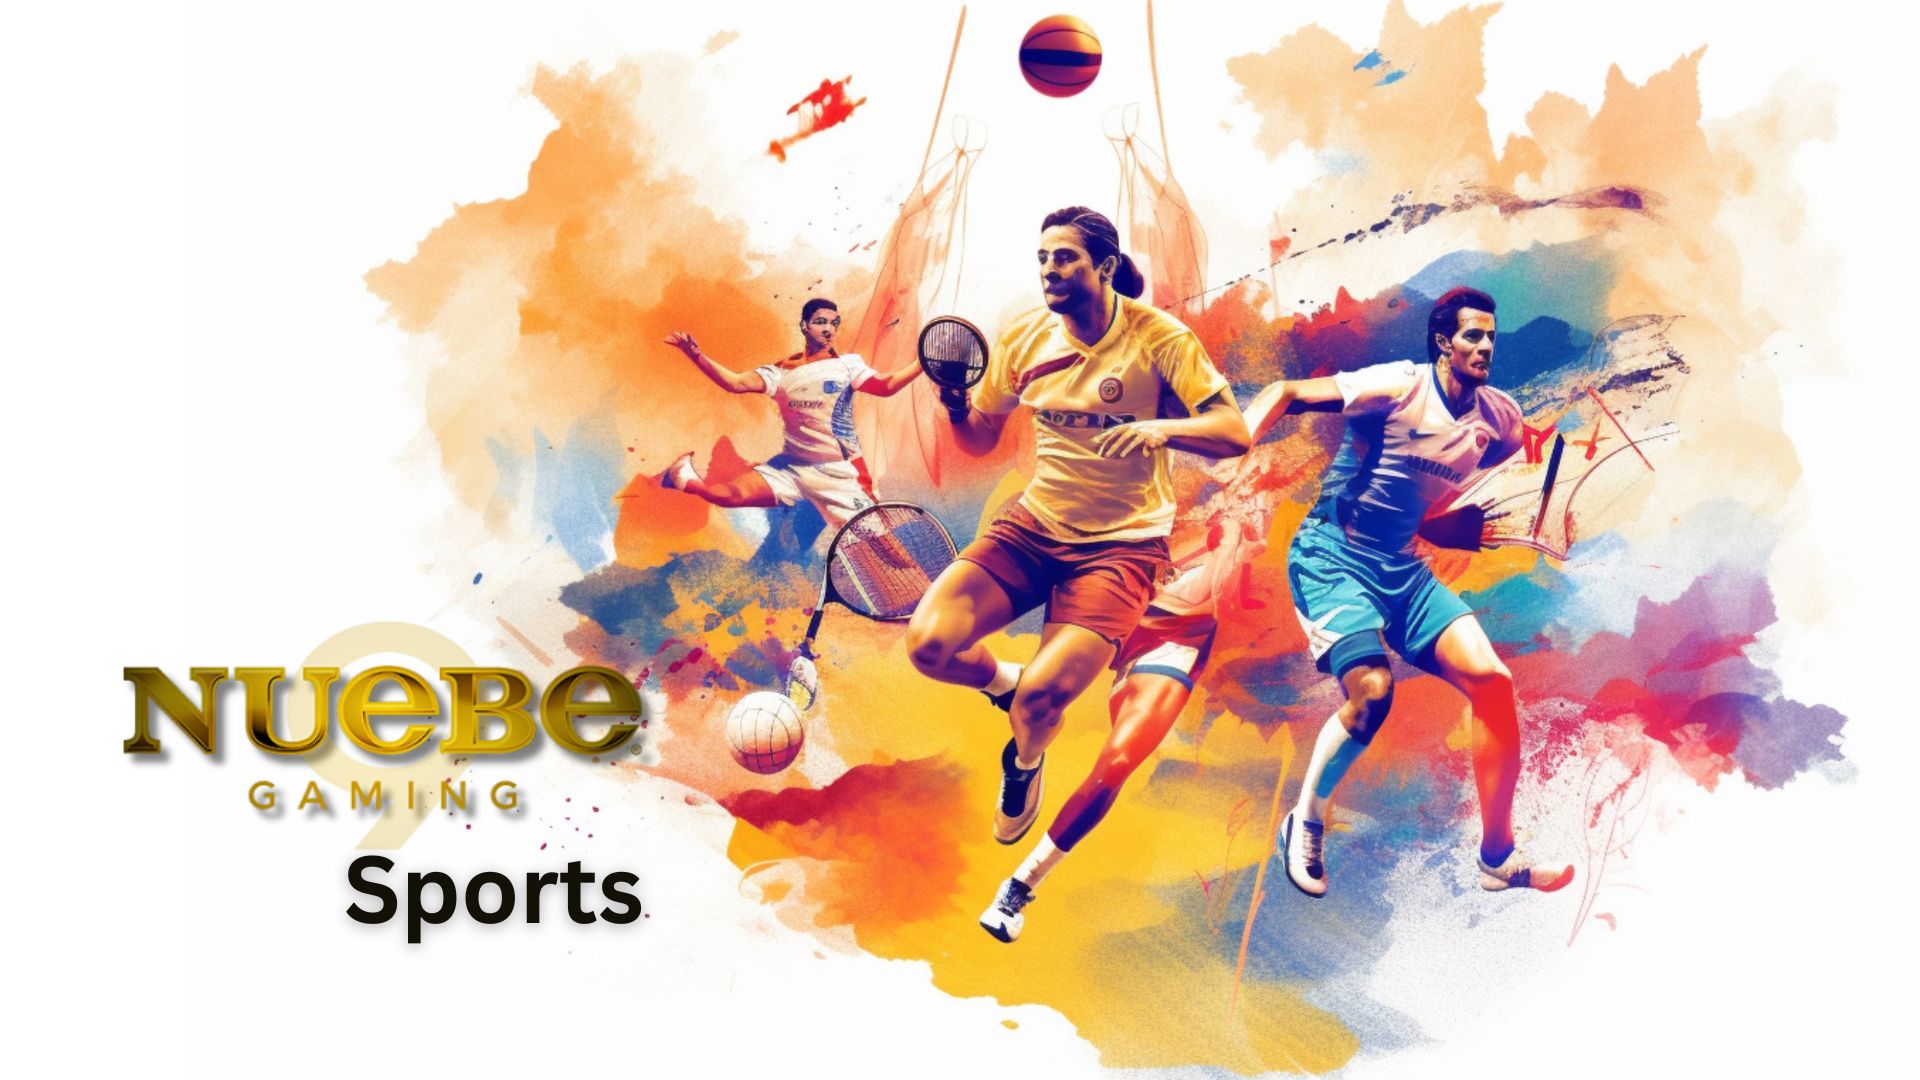 Set Your Sports Passion Ablaze at NUEBE Gaming: Where Thrills Await